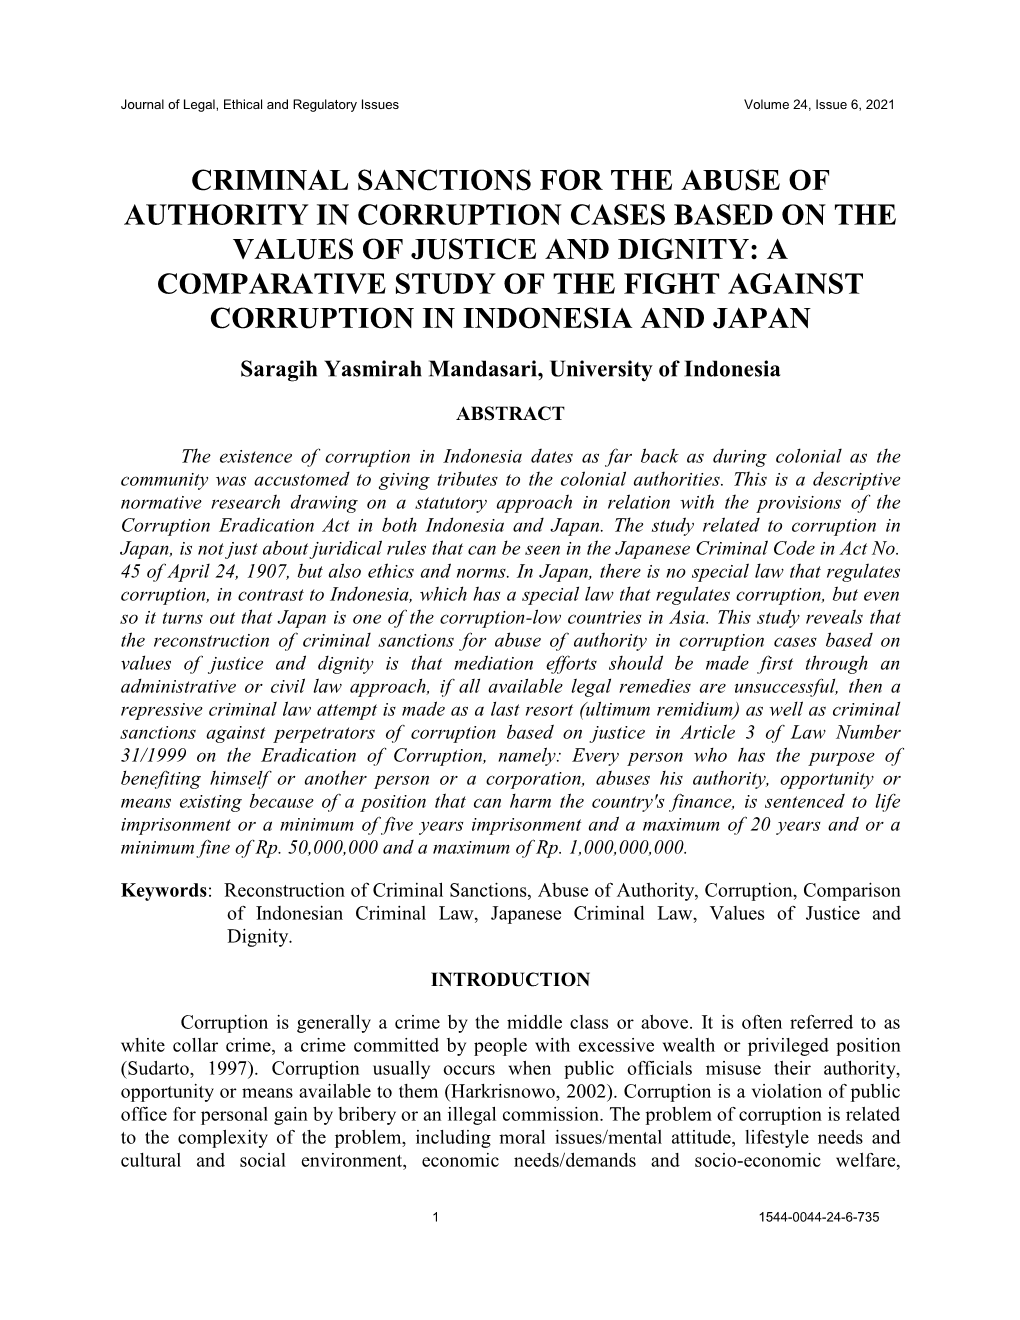 Criminal Sanctions for the Abuse of Authority in Corruption Cases